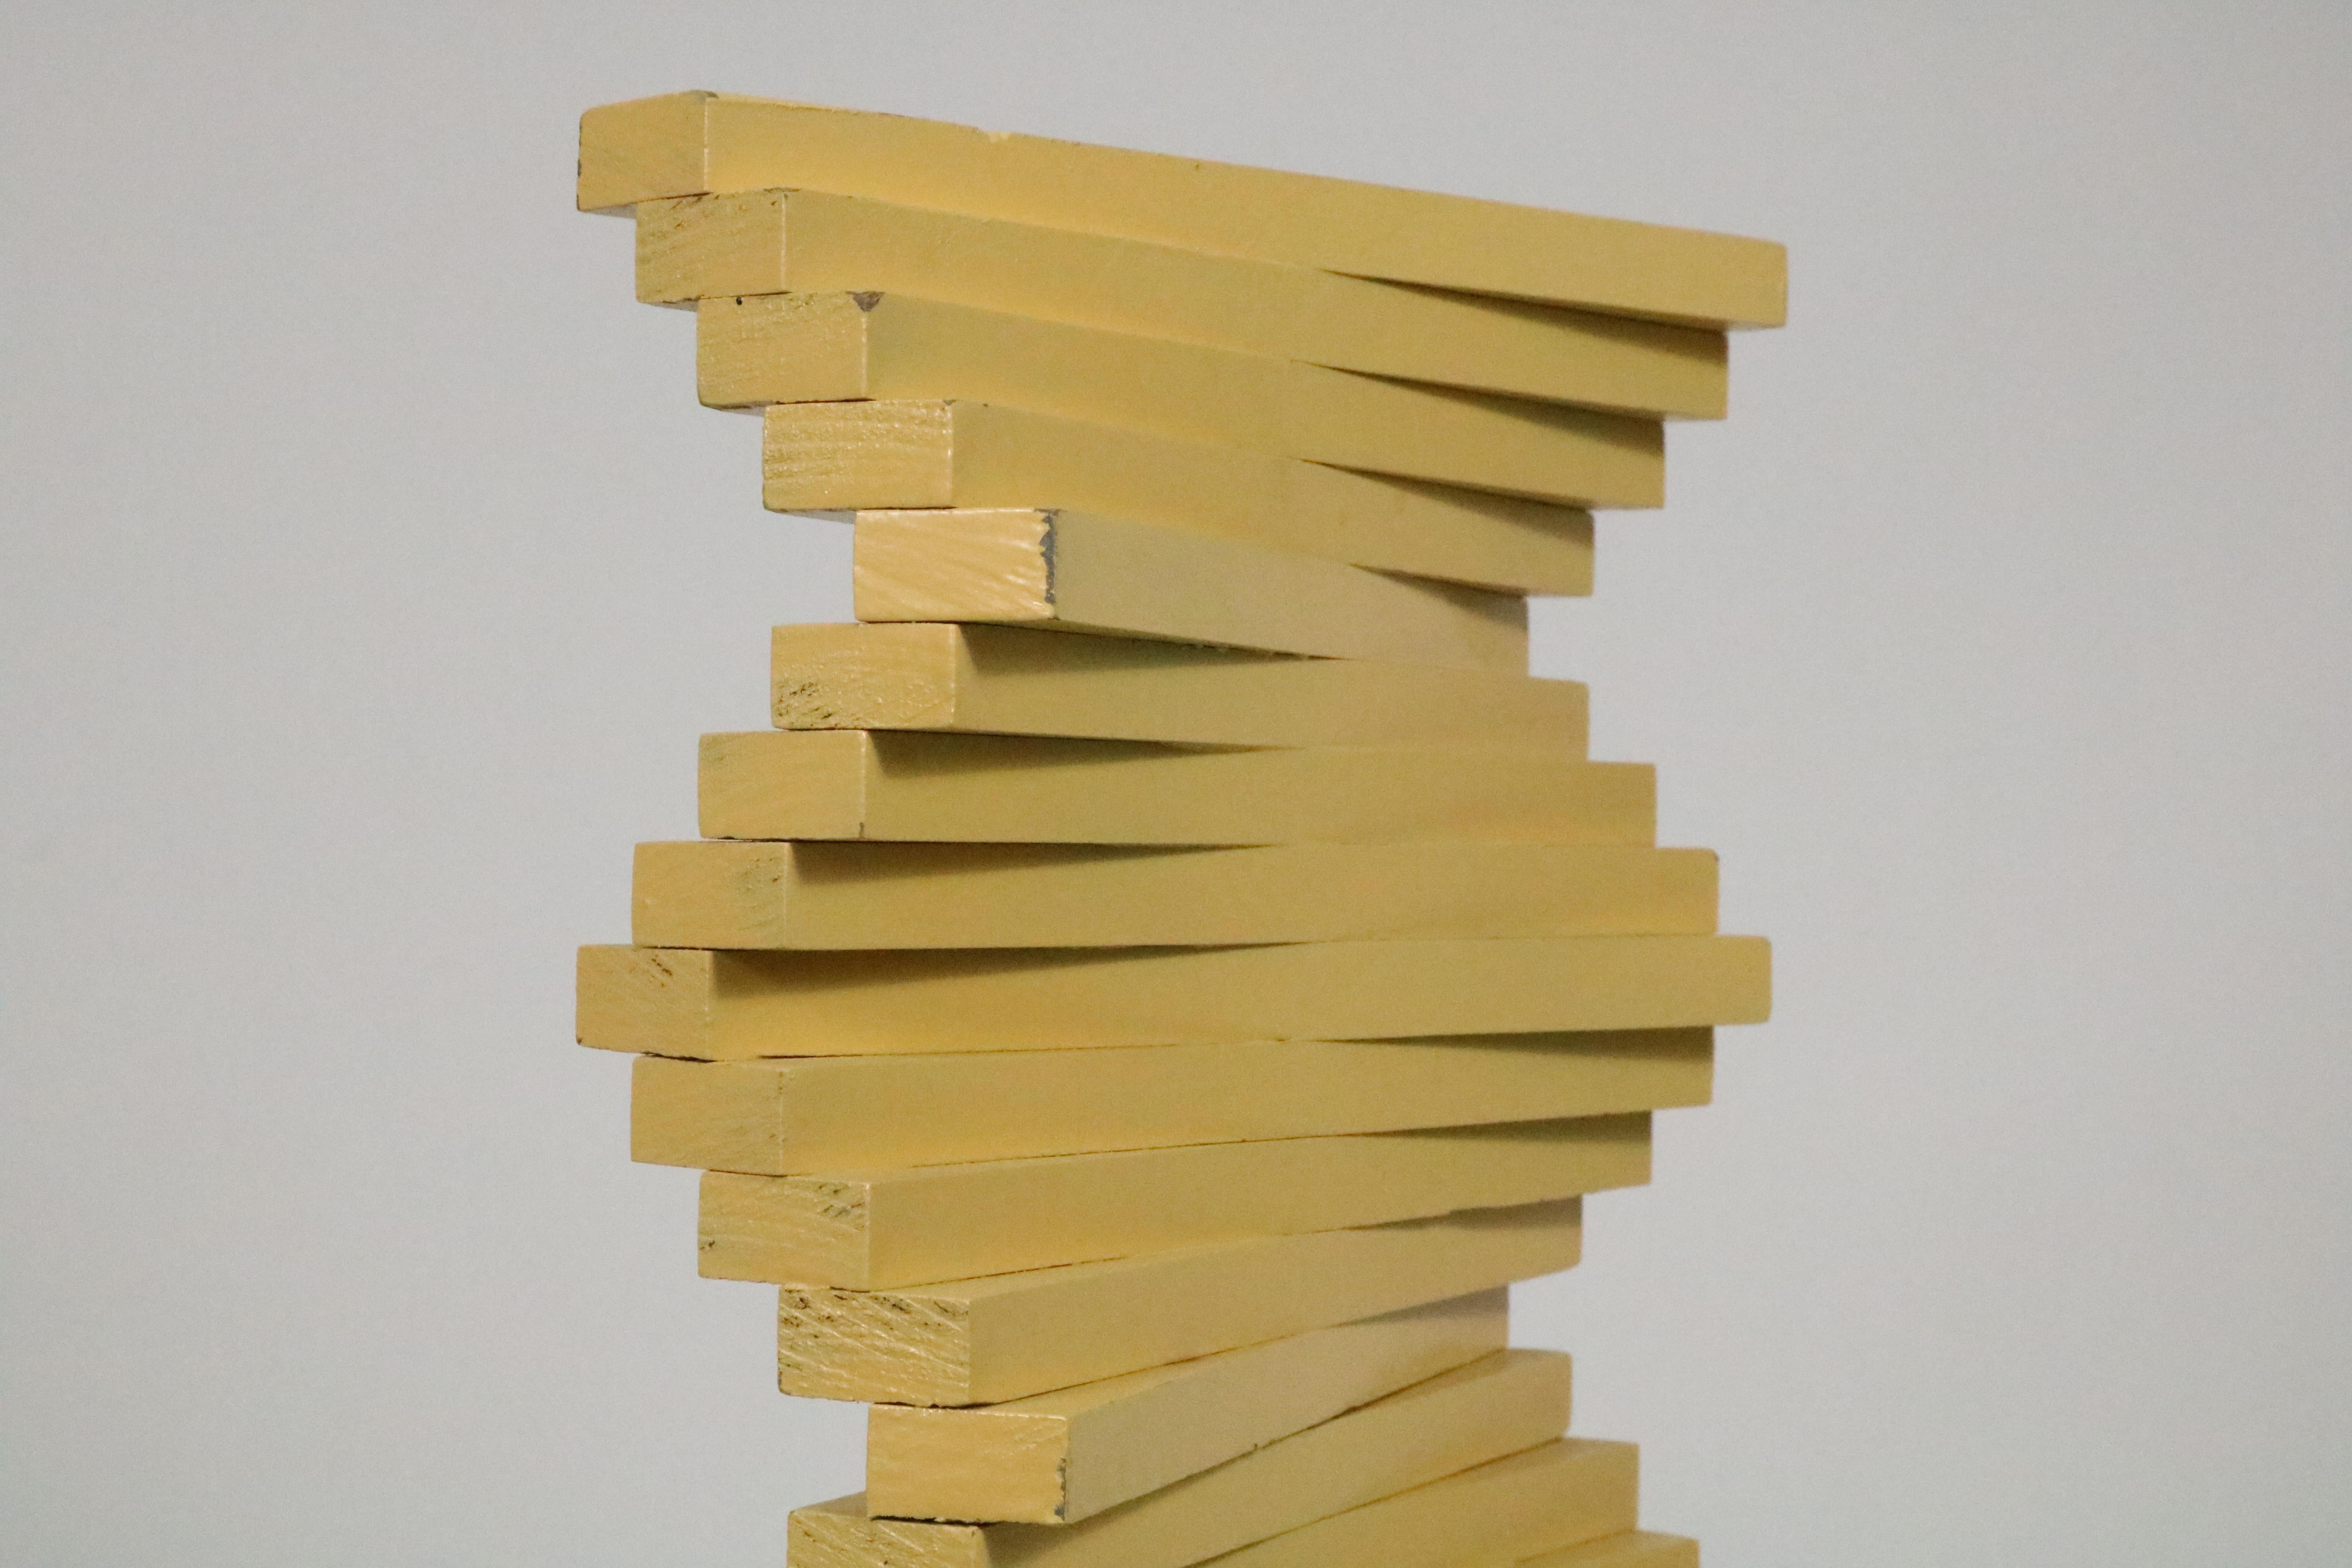 Late 20th Century Artist's Maquette for the Articulated Wall Sculpture by Herbert Bayer